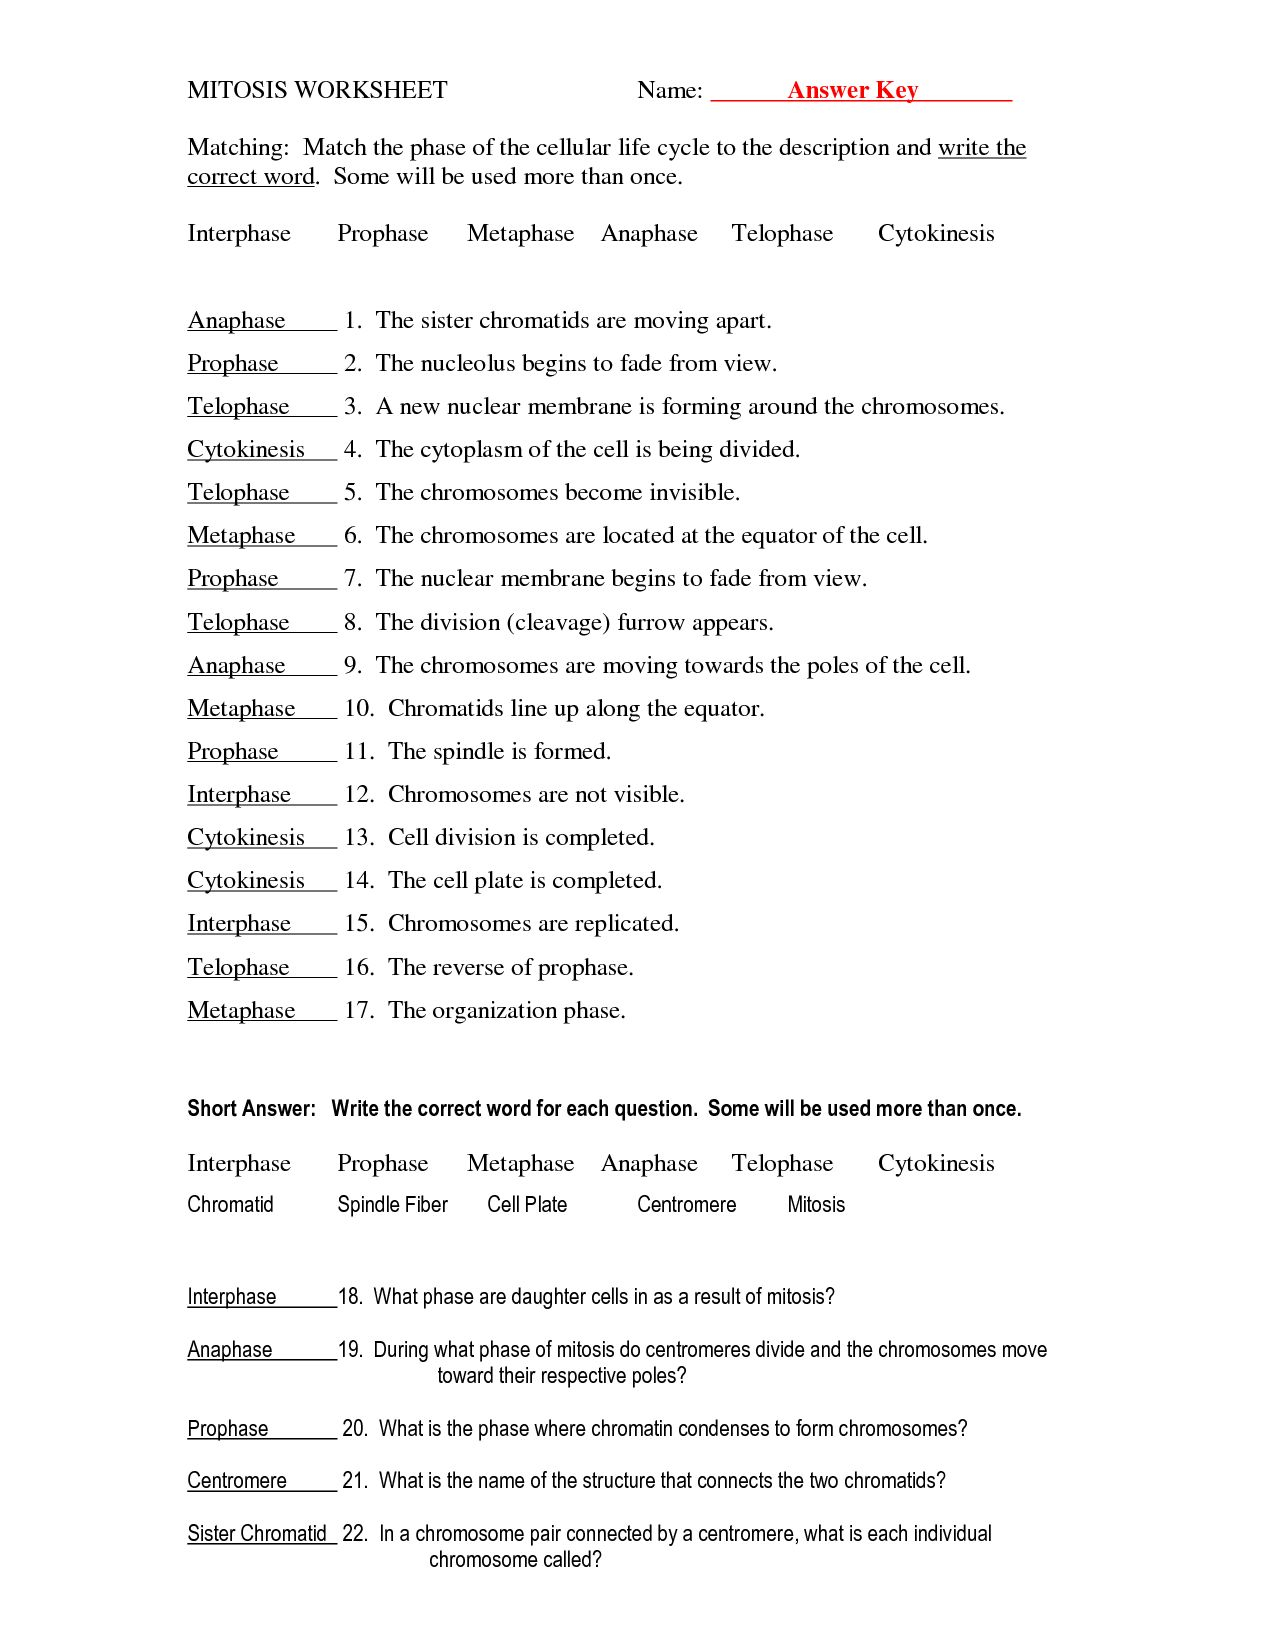 Mitosis And Meiosis Worksheet Answer Key db excel com